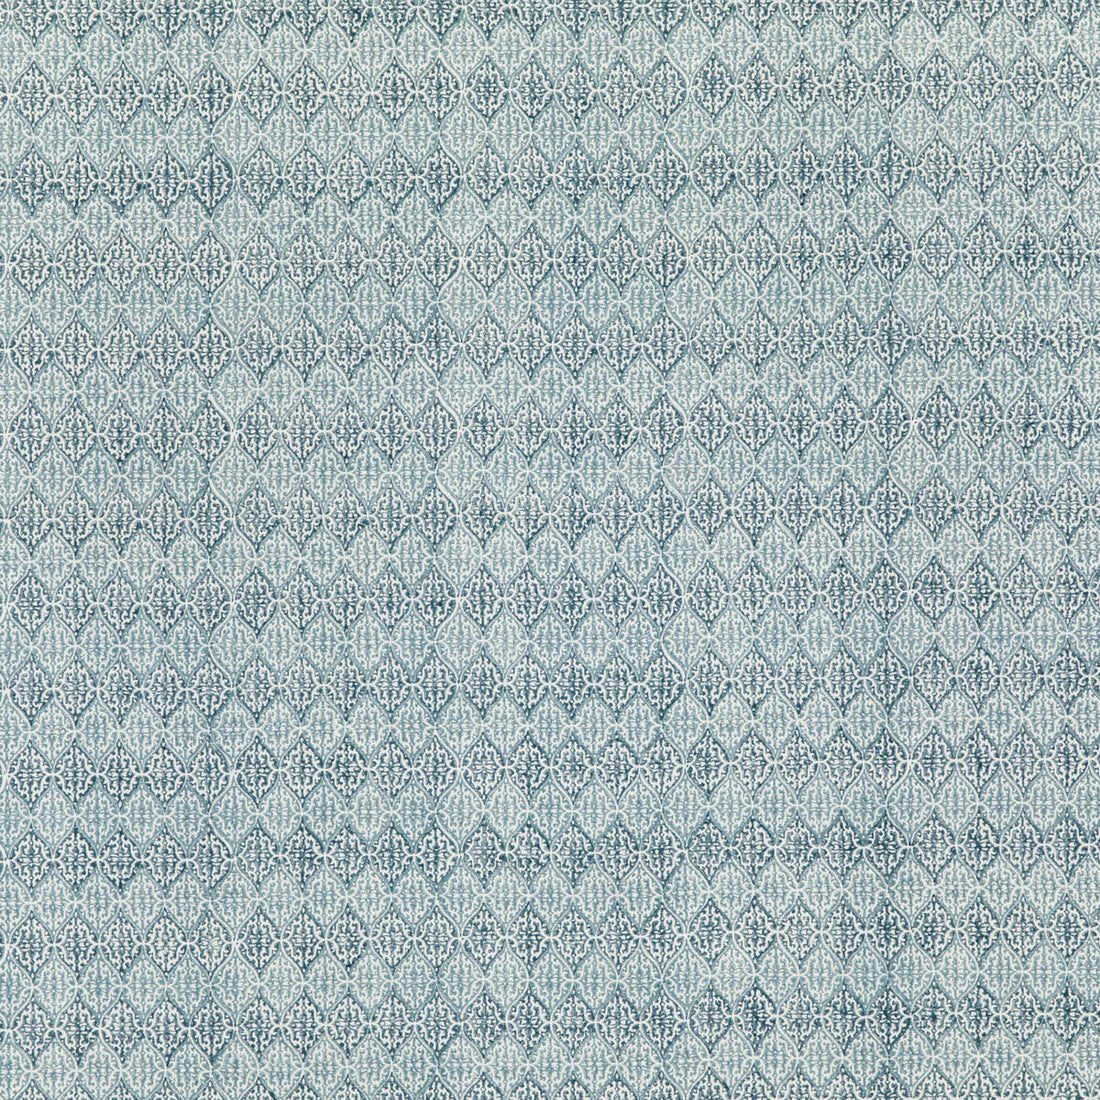 Tivington fabric in soft teal color - pattern BP10777.3.0 - by G P &amp; J Baker in the Signature Prints collection